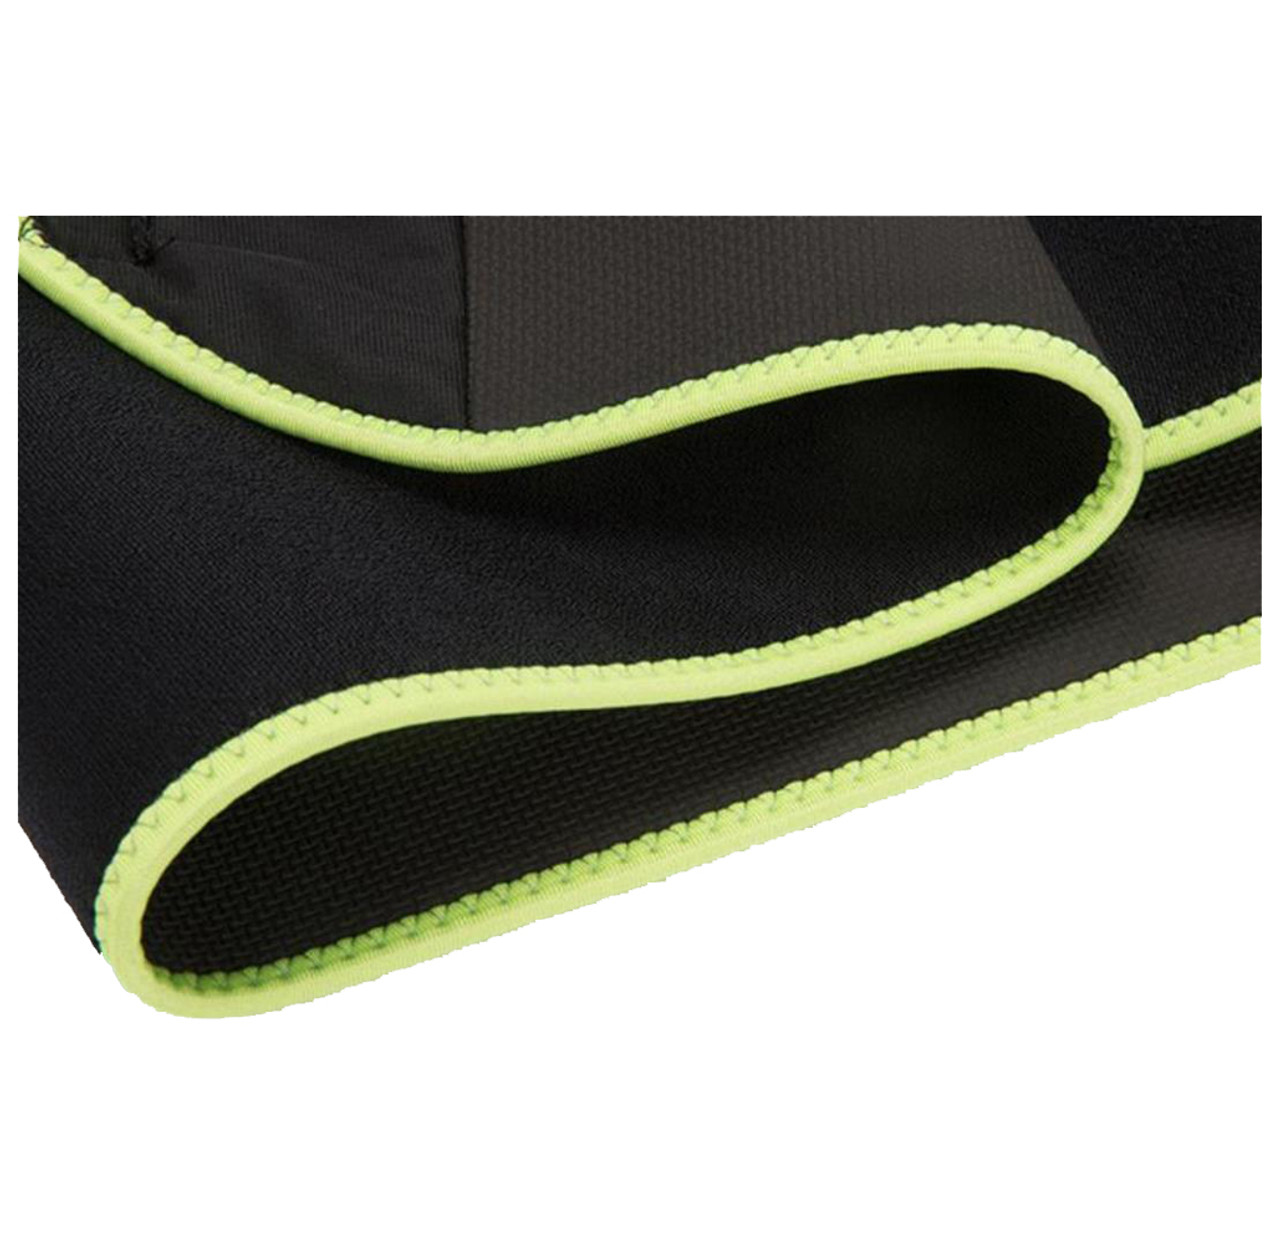 Waist Trainer and Back Support Belt product image